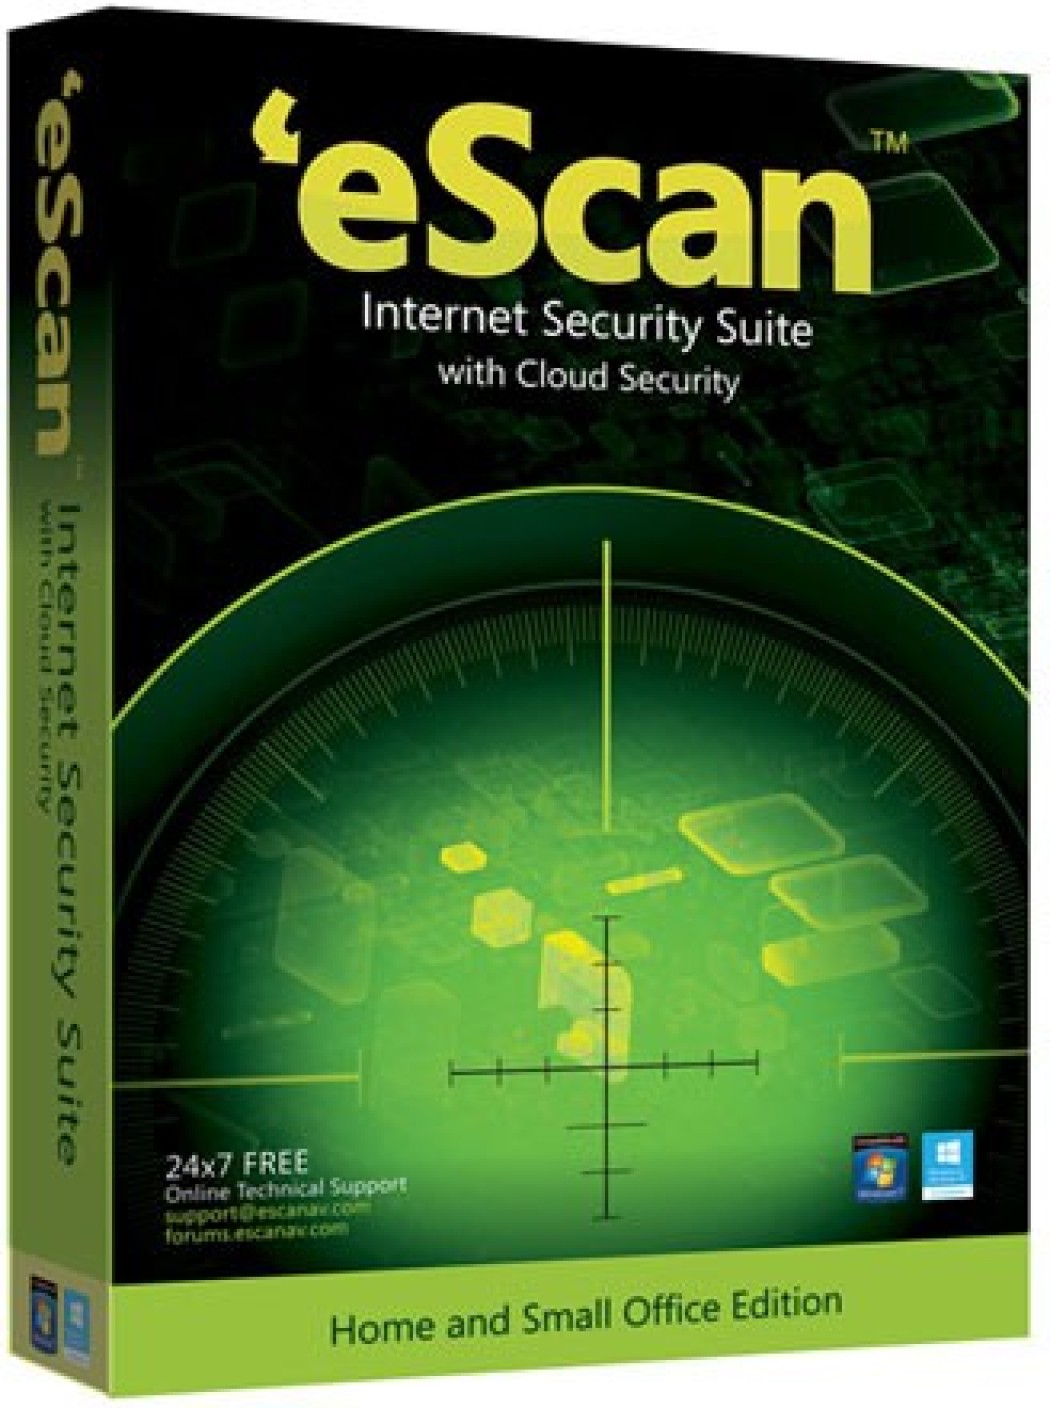 Escan internet security edition for home user 2 user 2 years